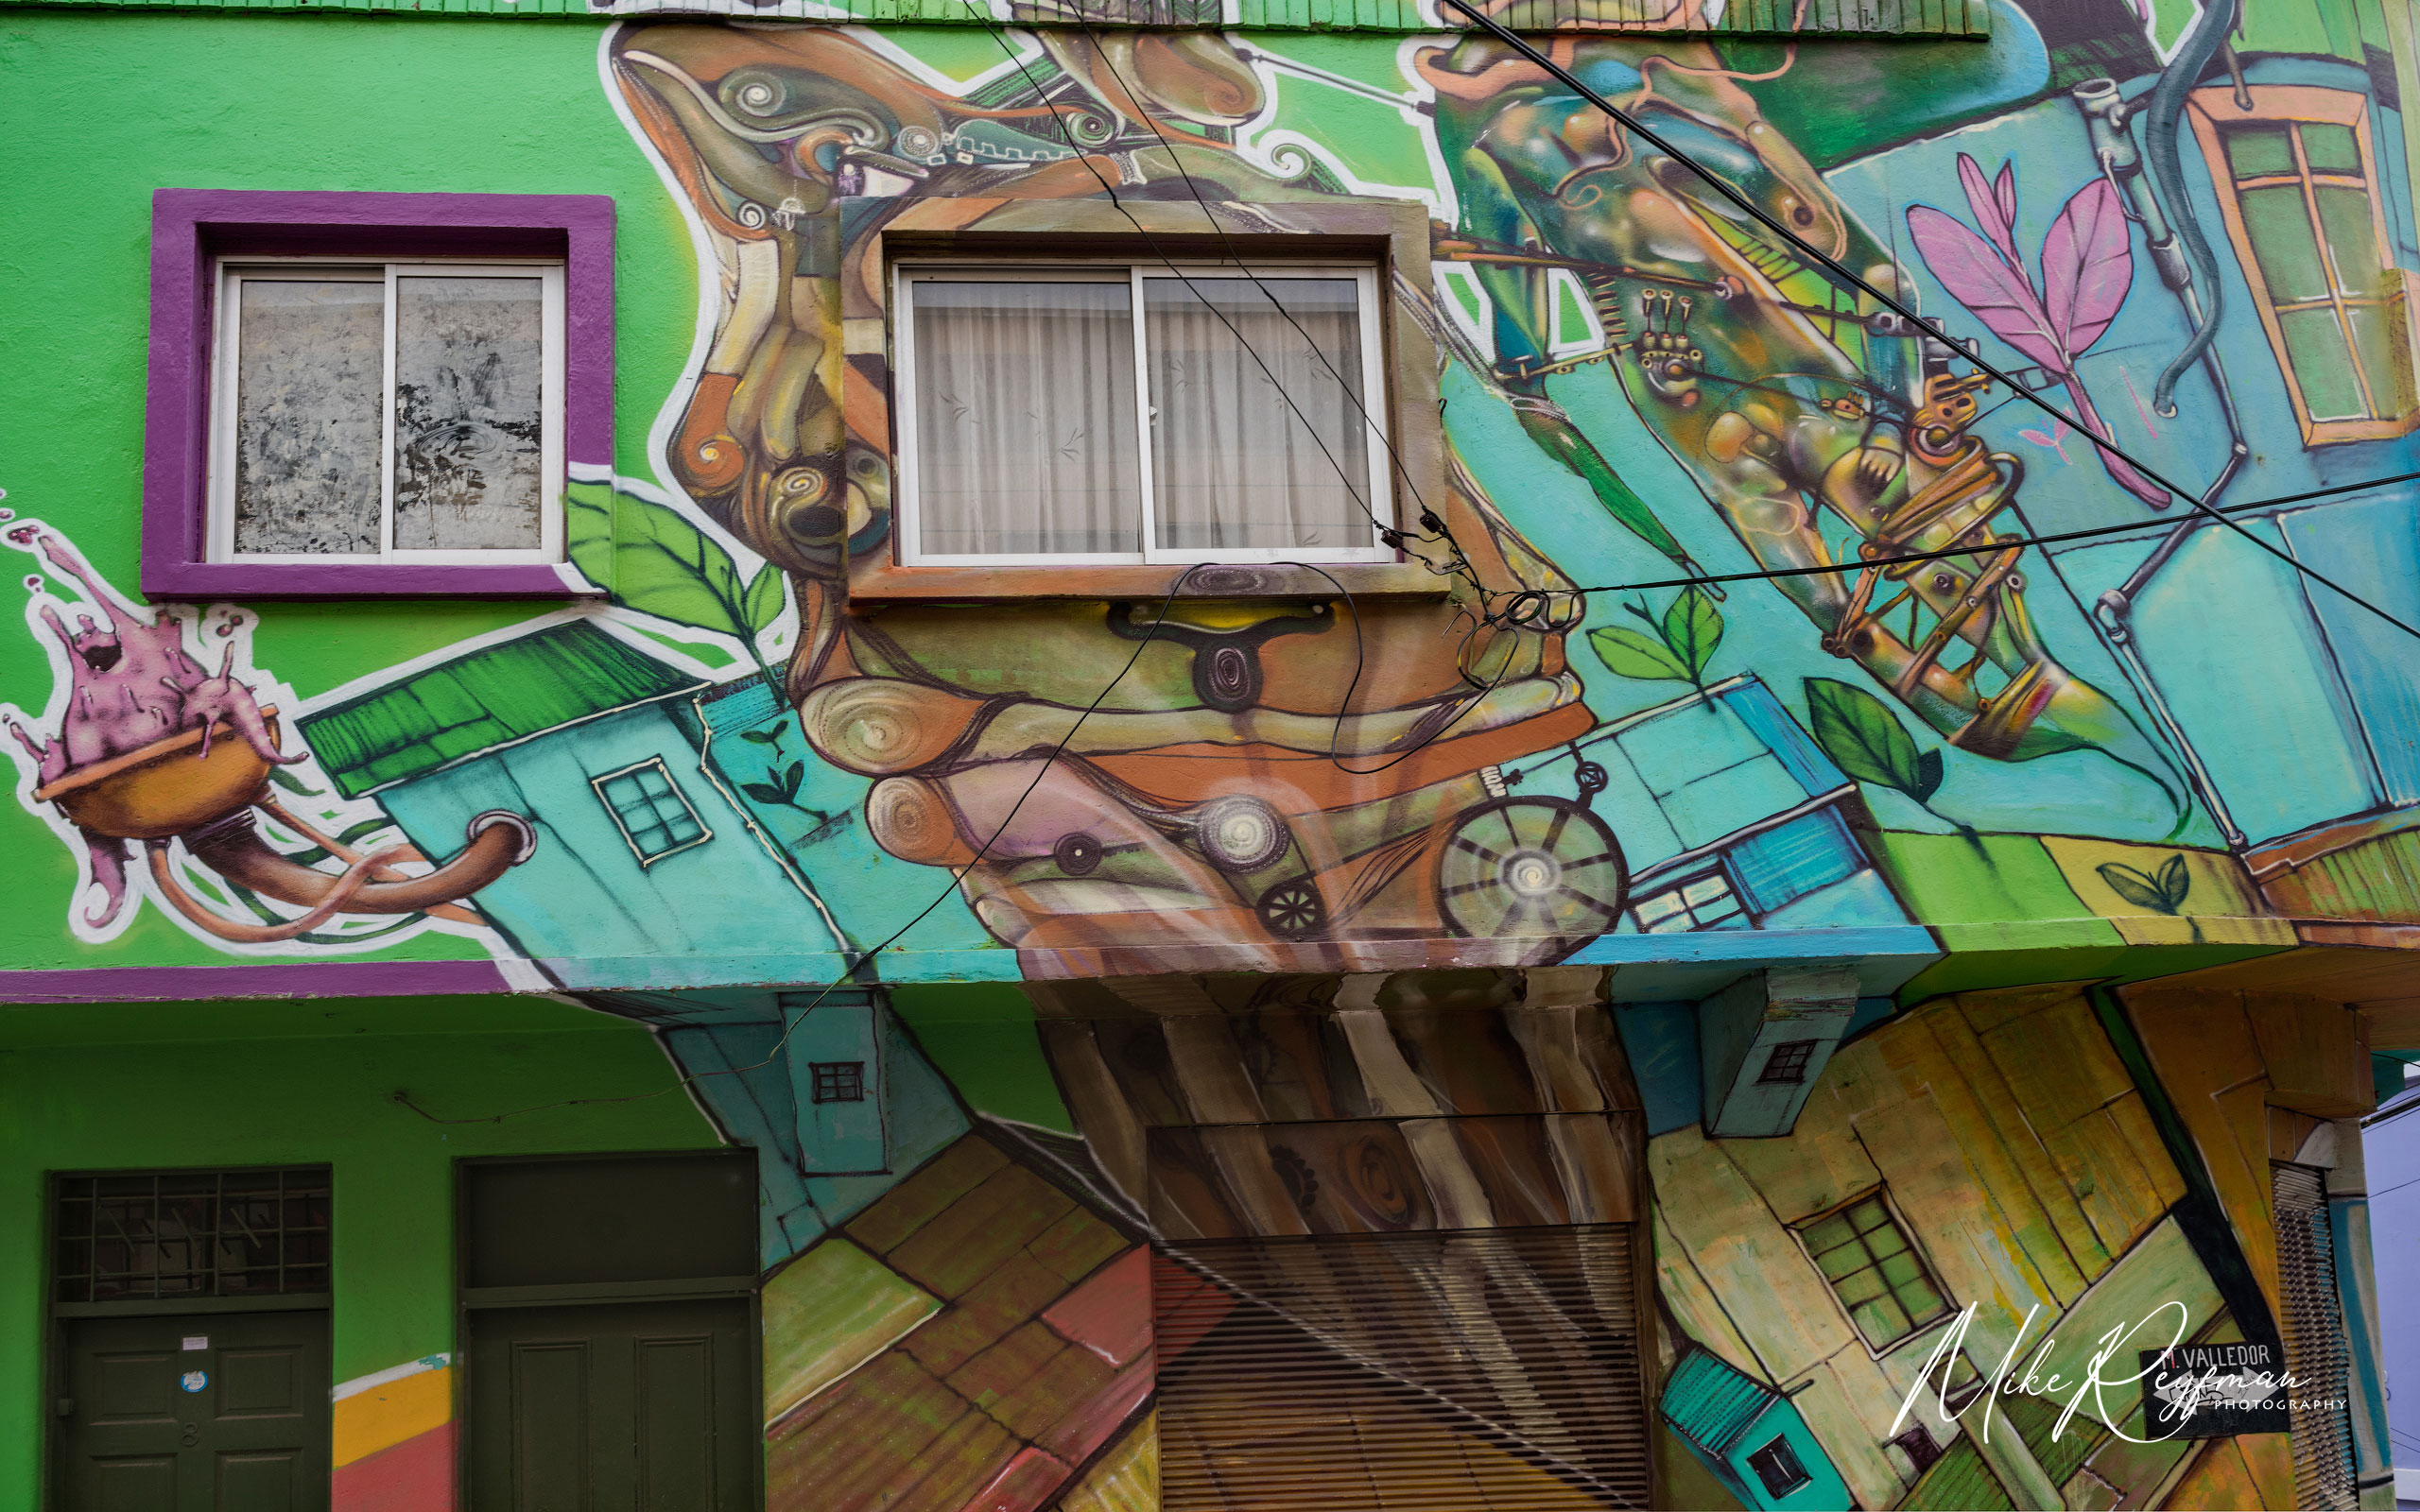 Valparaiso, Chile. The Graffiti Capital of the World 019-VP _D1D0268 - Valparaiso, Chile. The Graffiti Capital of the World - Mike Reyfman Photography